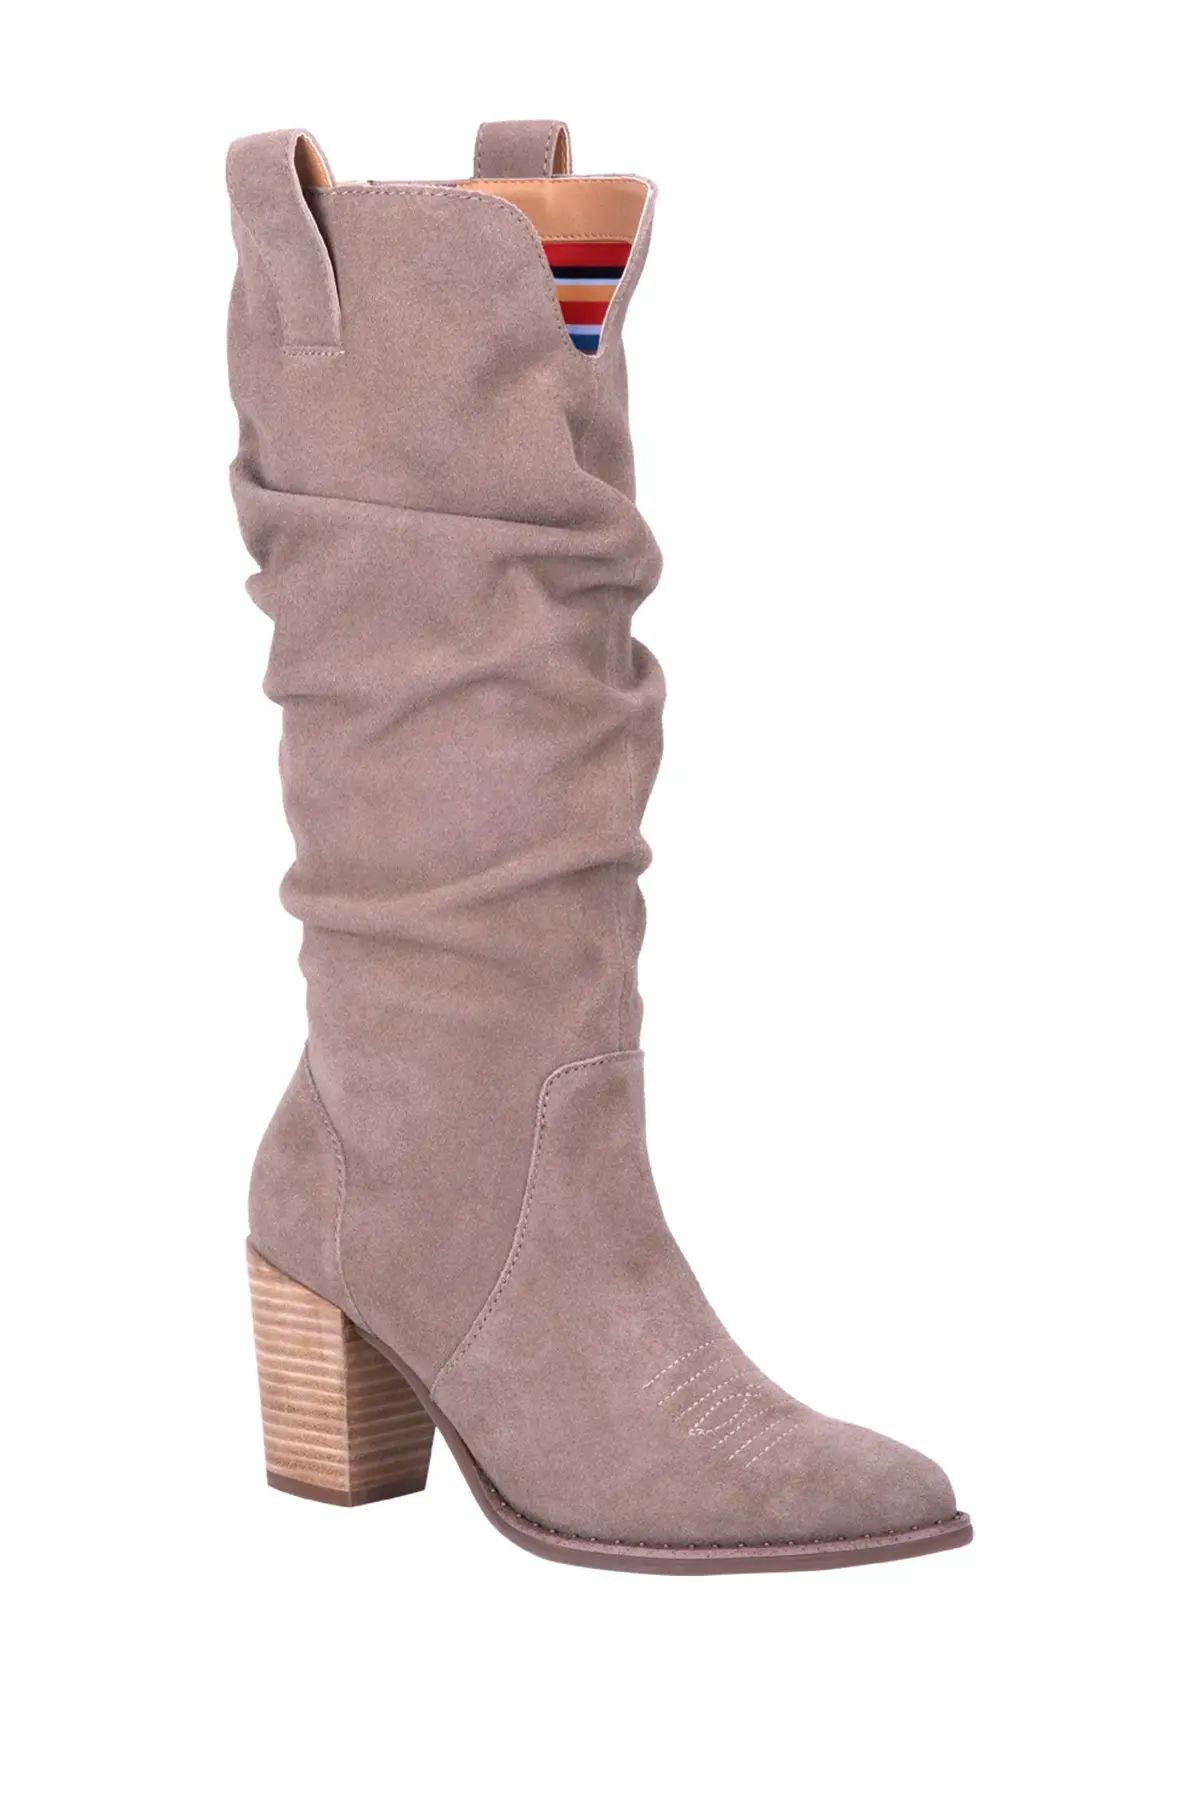 DINGO Cantina Western Suede Slouchy Knee High Boot at Nordstrom Rack | Nordstrom Rack